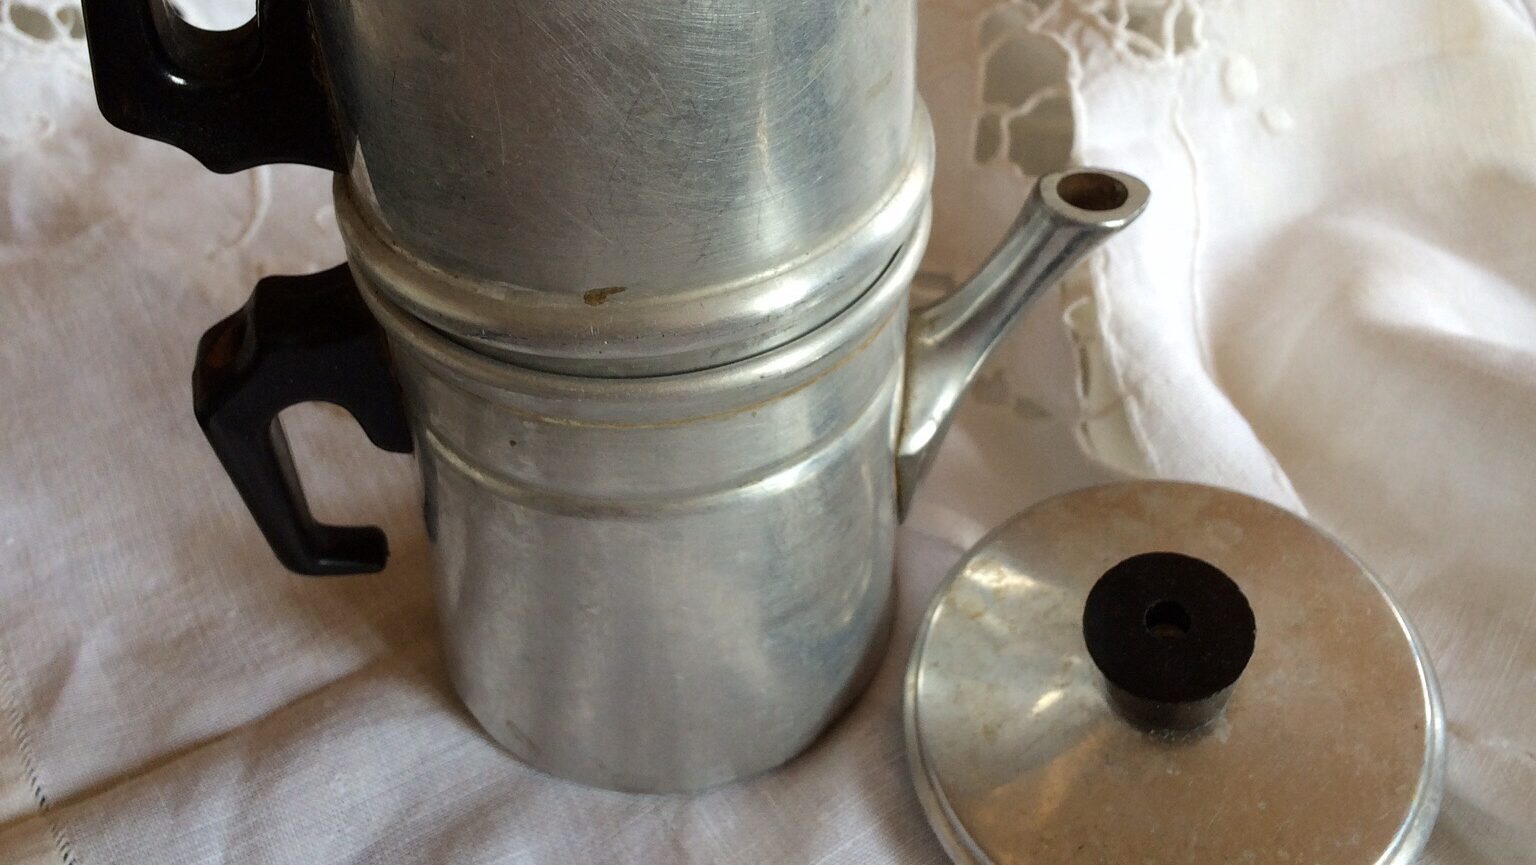 Neapolitan Coffee Maker Vintage Made in Italy